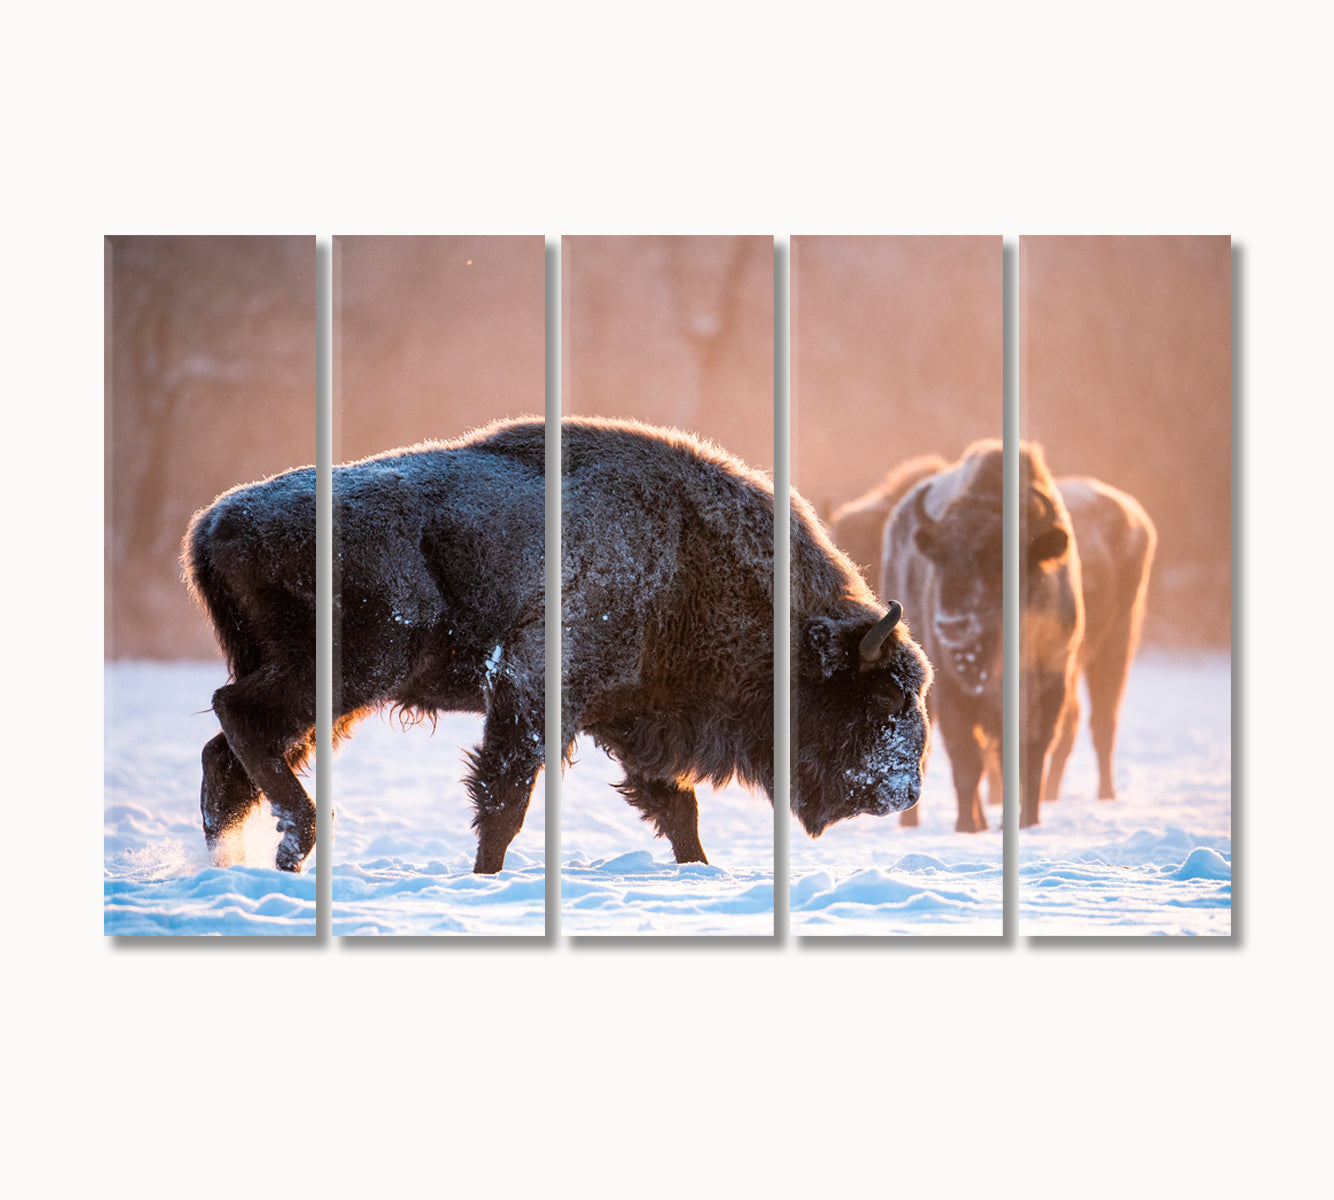 Bisons in the Winter Wild Canvas Print-Canvas Print-CetArt-5 Panels-36x24 inches-CetArt